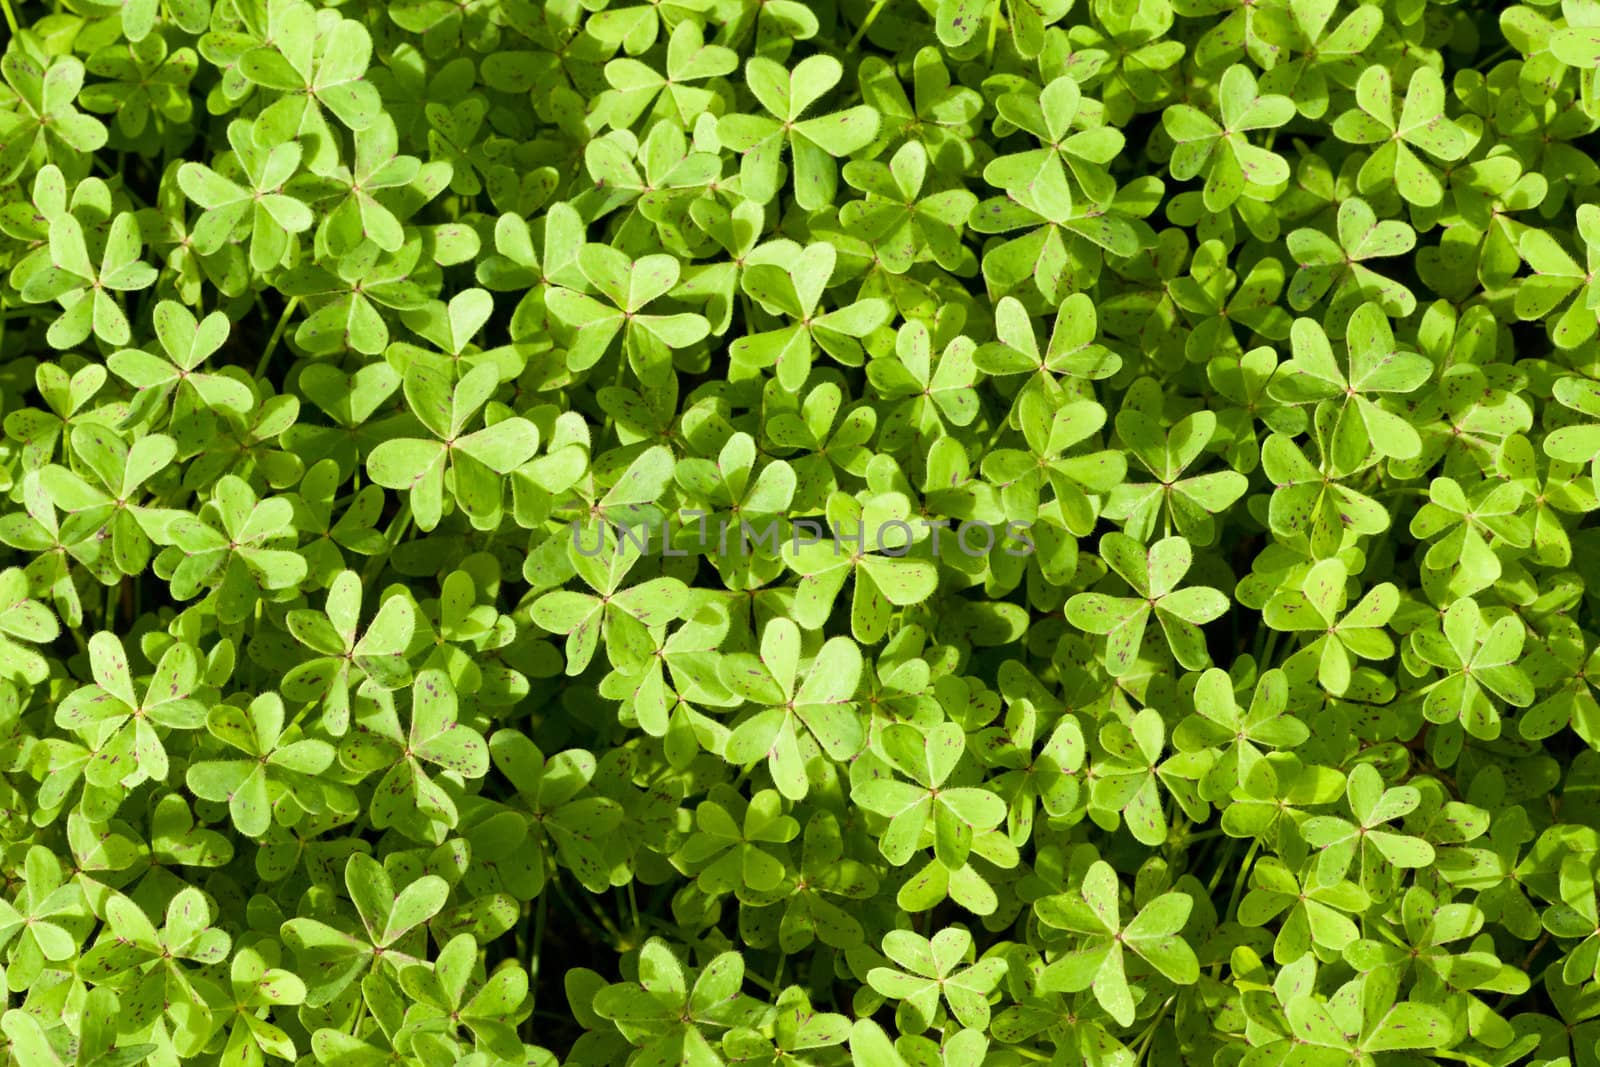 Background texture pattern of freshly spring-grown clover leaves densely covering the ground.